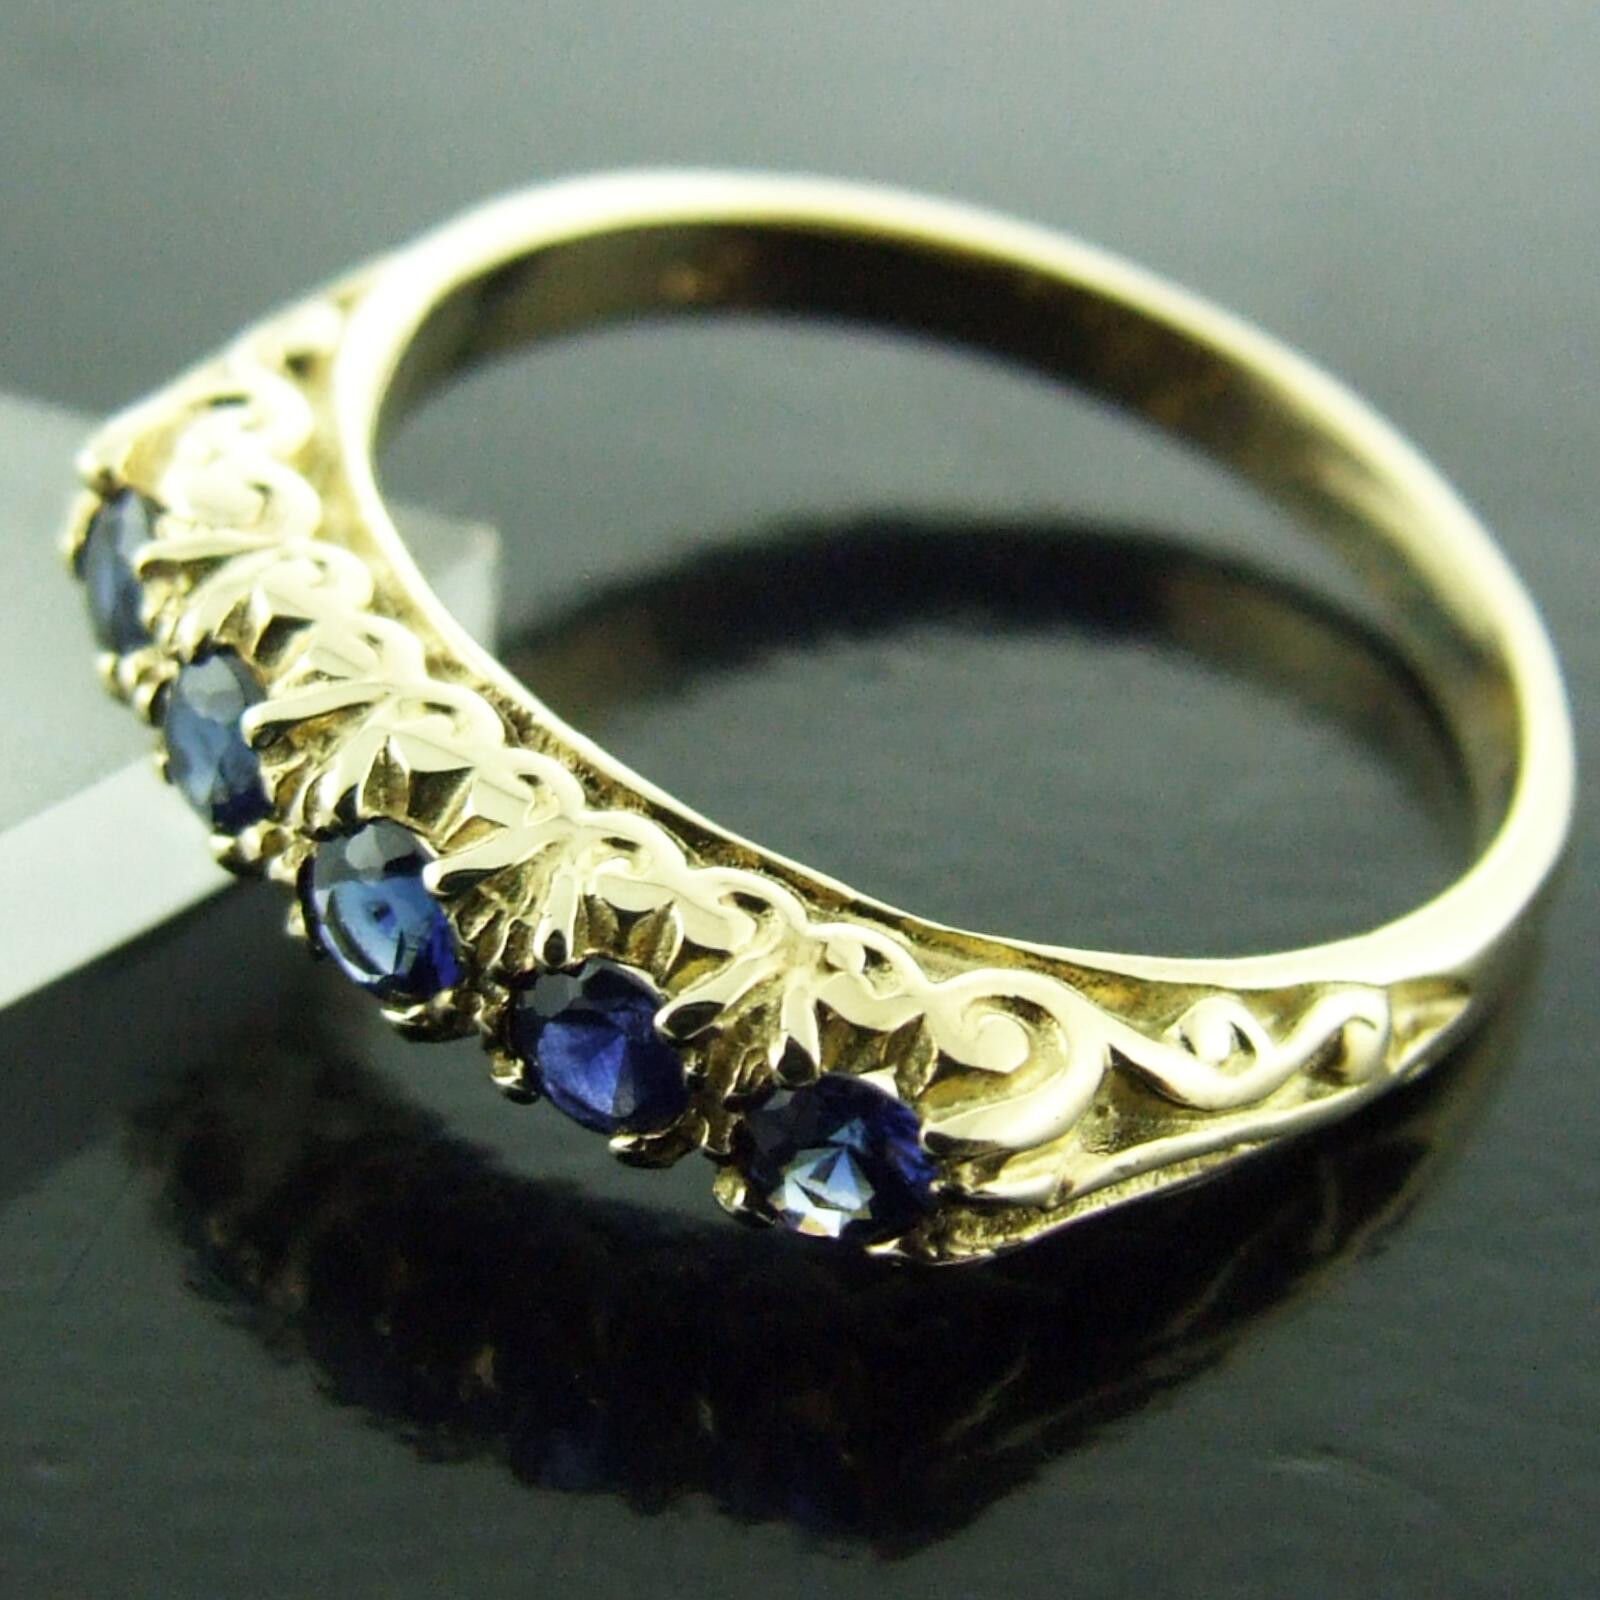 AUTHENTIC REAL 9CT 9K YELLOW GOLD ANTIQUE DESIGN SAPPHIRE ETERNITY RING